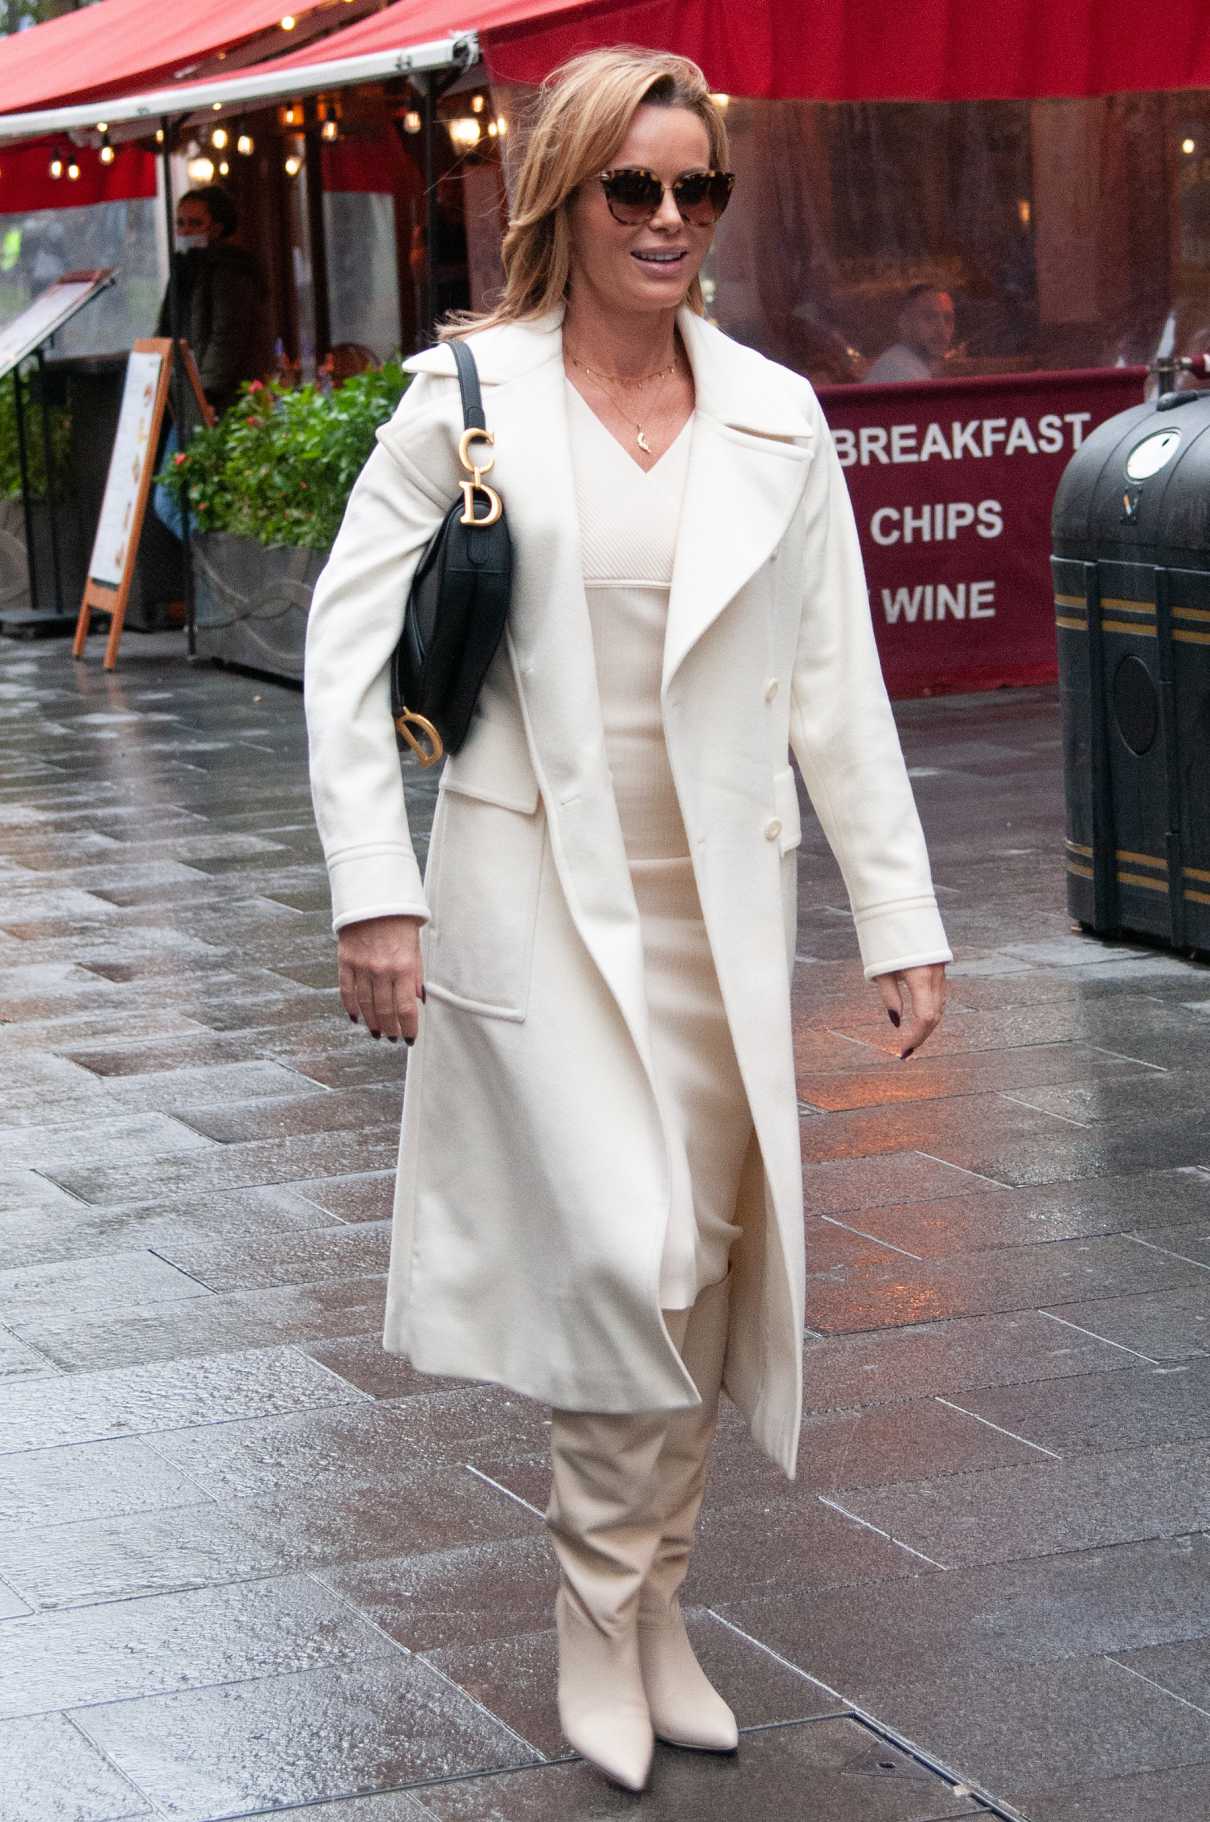 Amanda Holden in a White Coat Arrives at the Global Studios in London ...